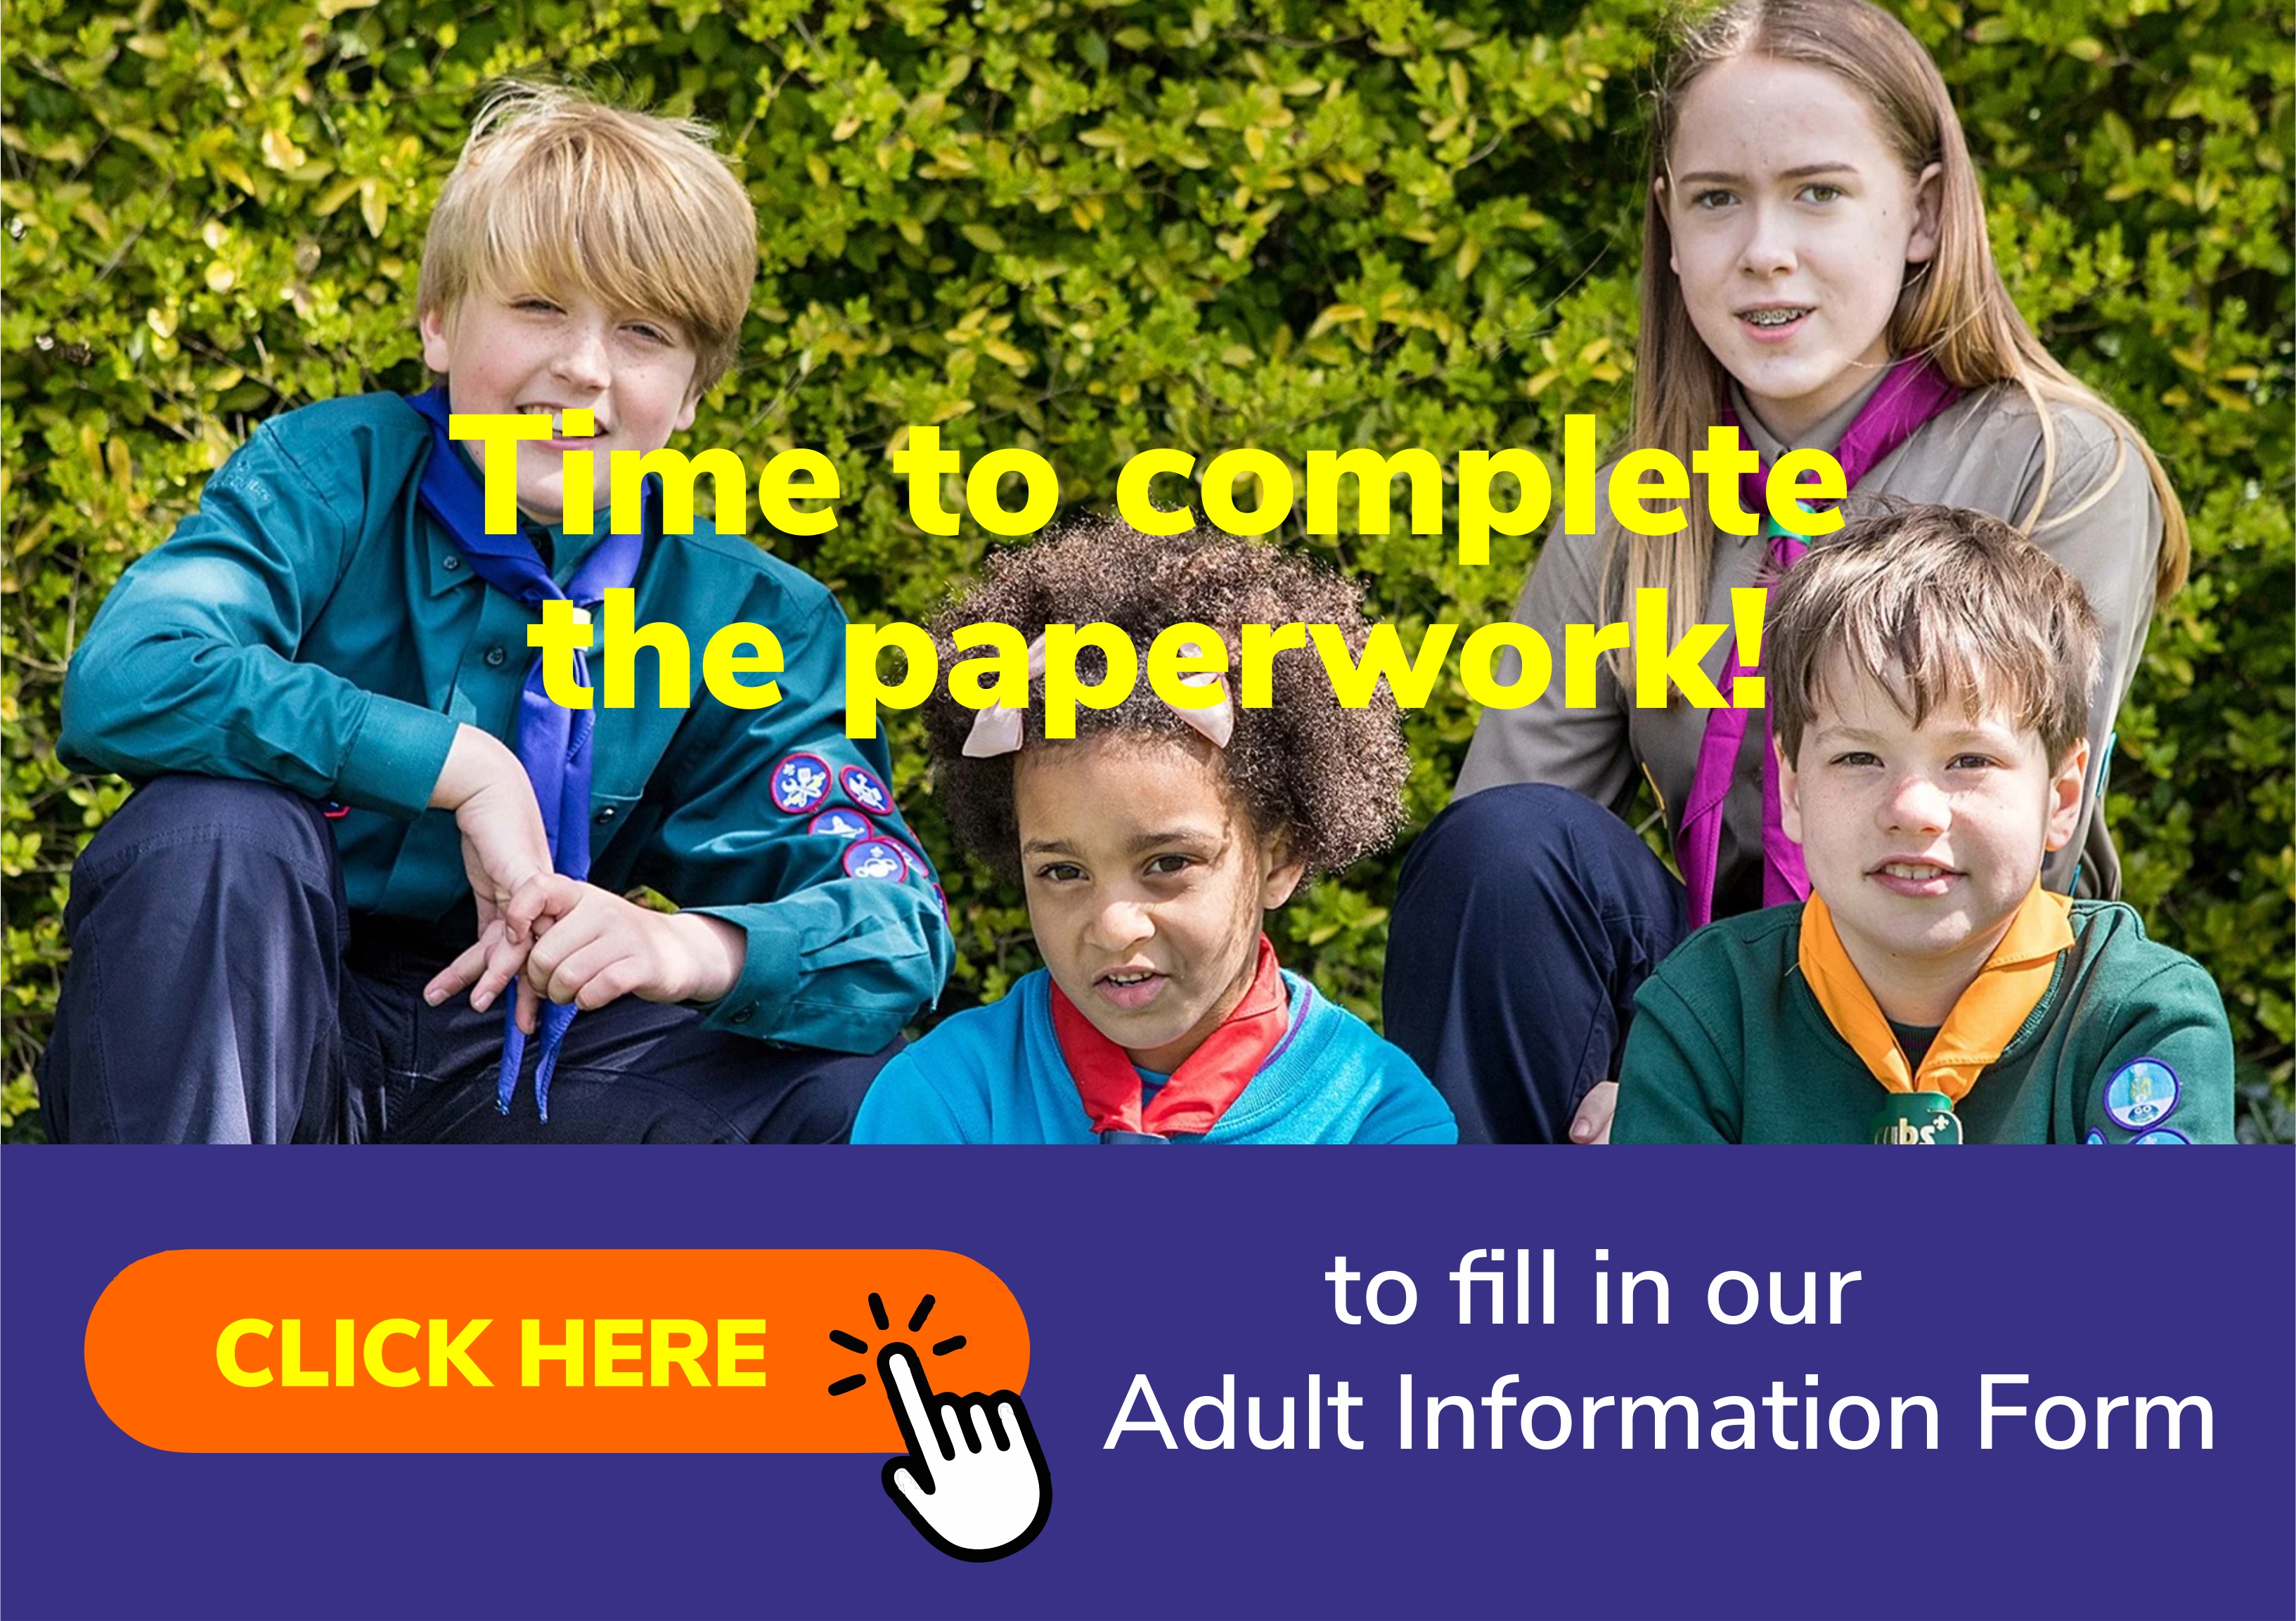 Click here to fill in our Adult Information Form